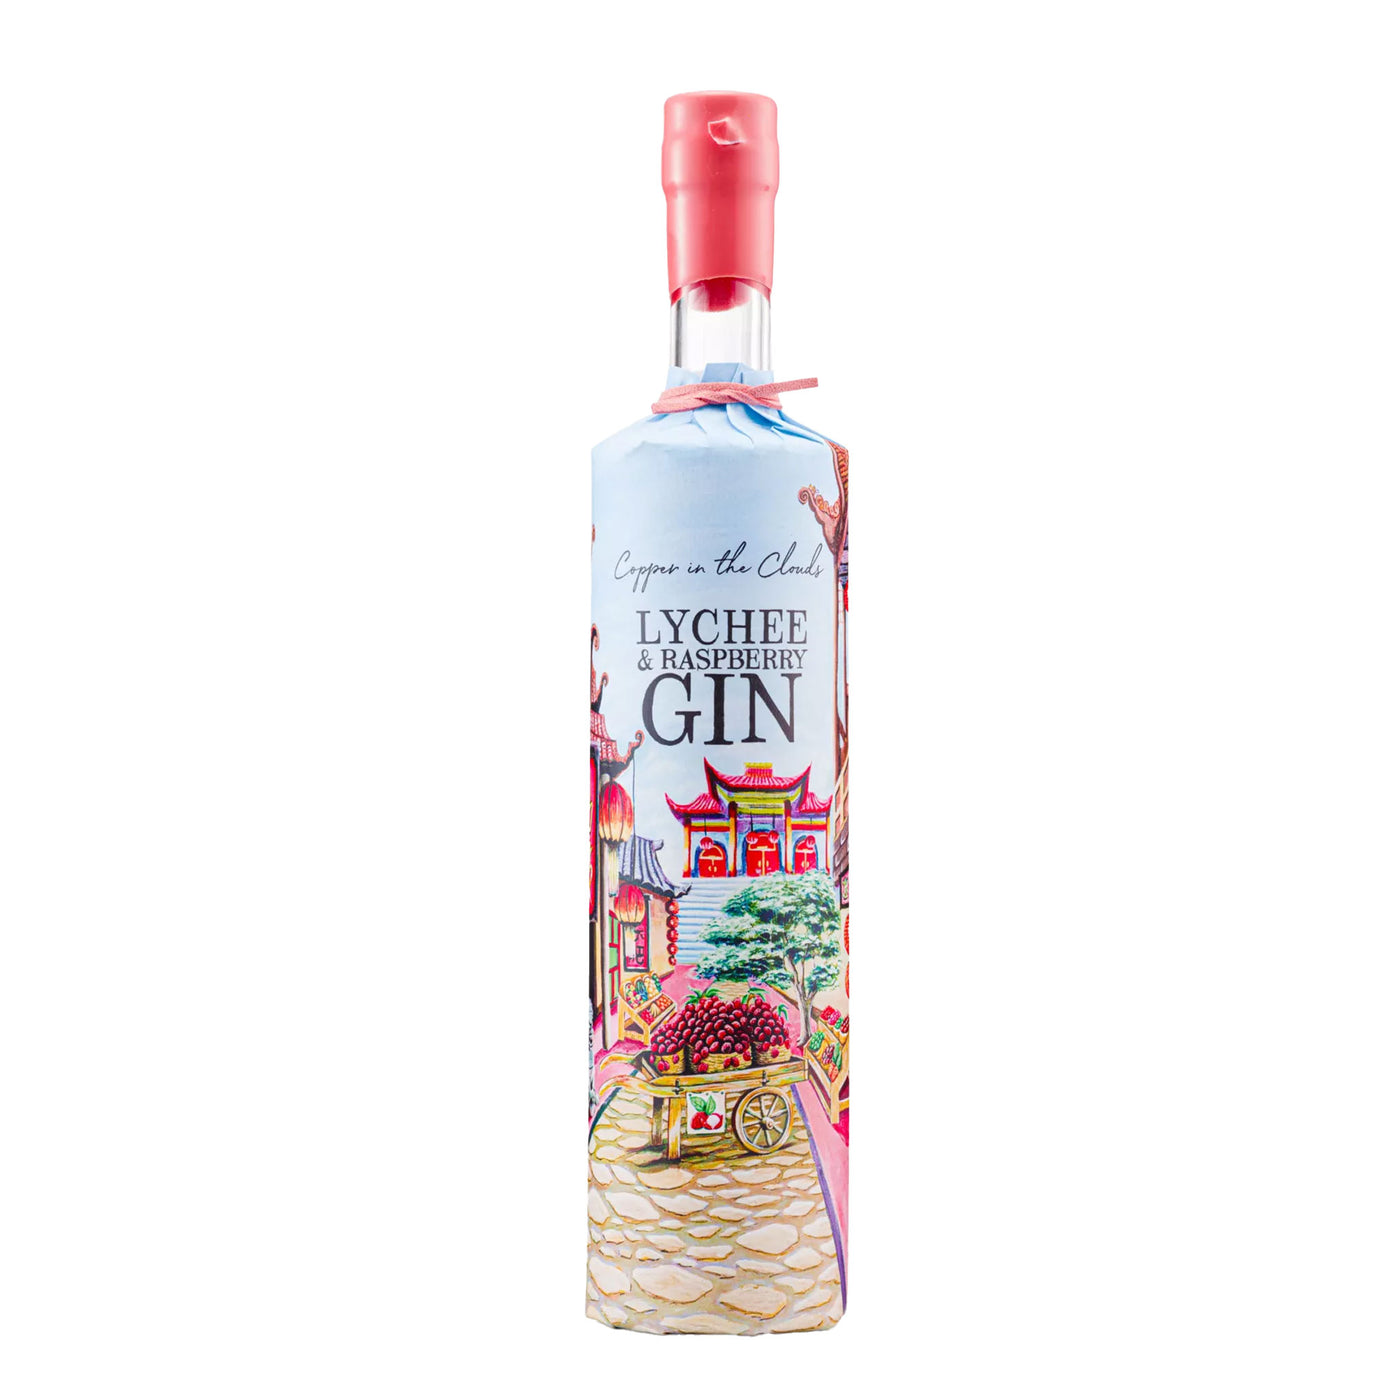 The Copper In The Clouds Lychee & Rasberry Gin - Spiritly